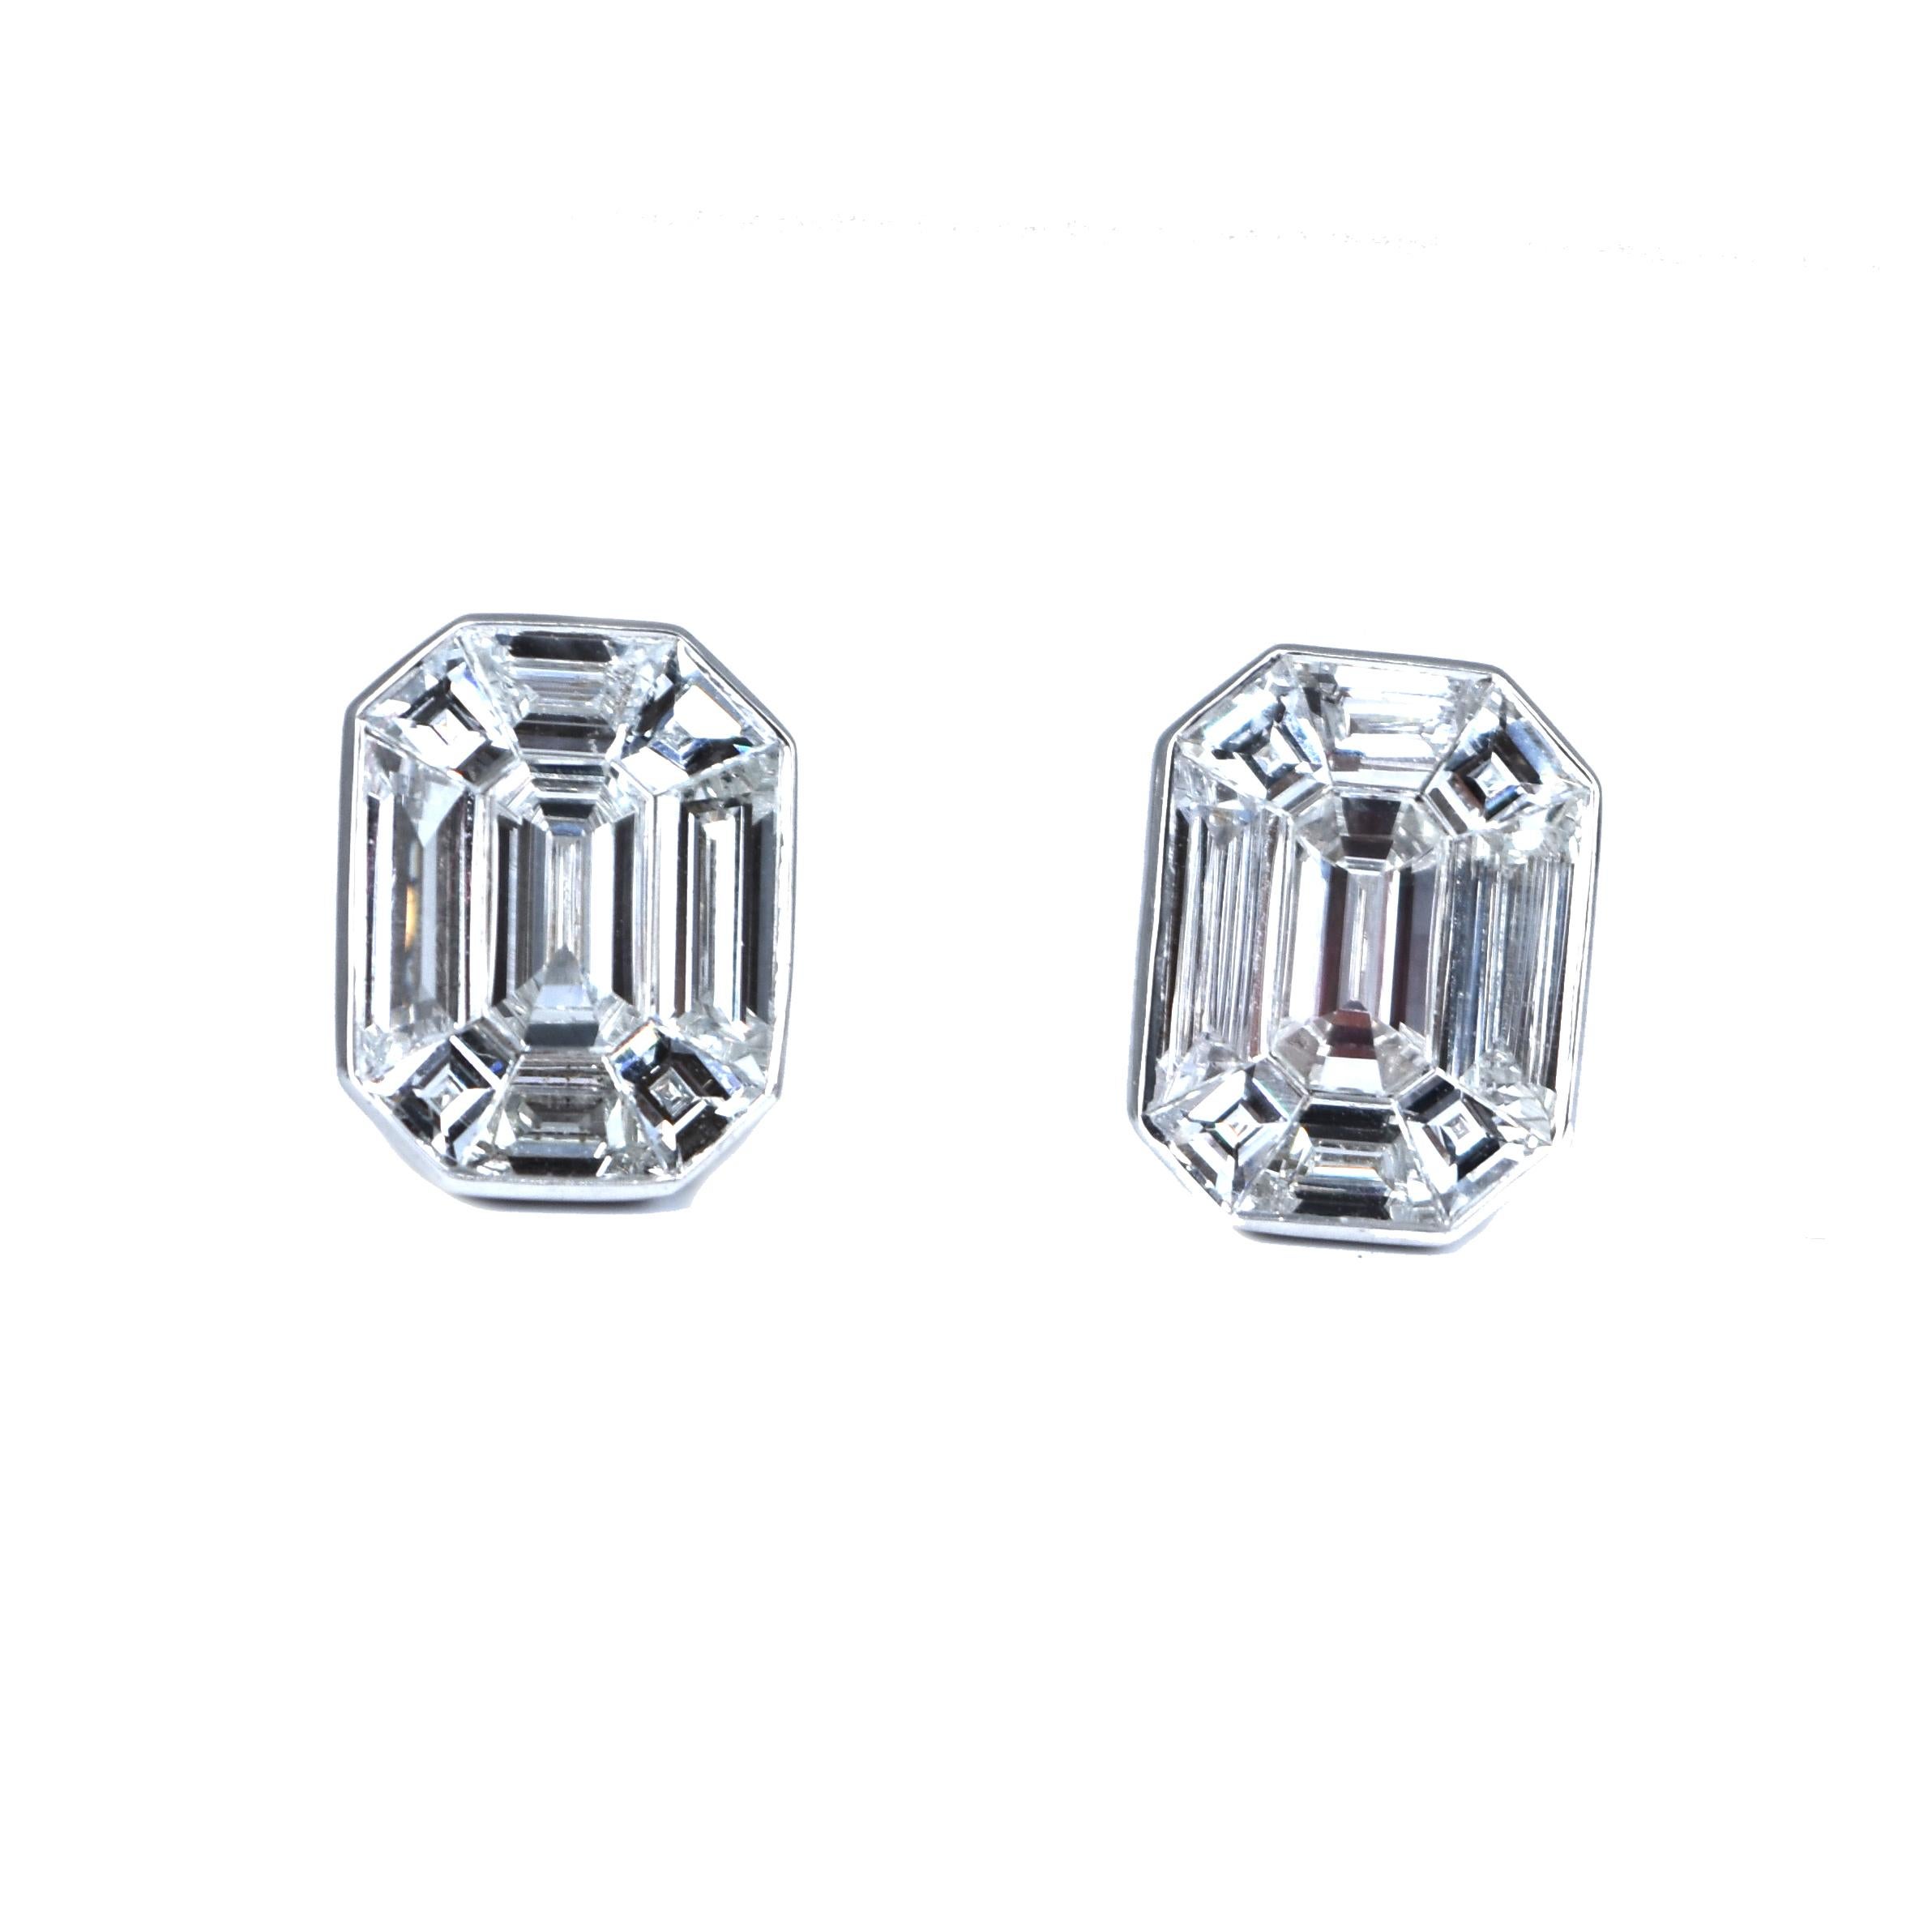 Brilliance Jewels, Miami
Questions? Call Us Anytime!
786,482,8100

Metal: White Gold

Metal Purity: 18k

Stones: Baguette Diamonds

Diamond Color: G

Diamond Clarity: VVS1

Total Carat Weight: 2.48 ct

Earring Dimension: Approx. 12mm x 9mm

Total